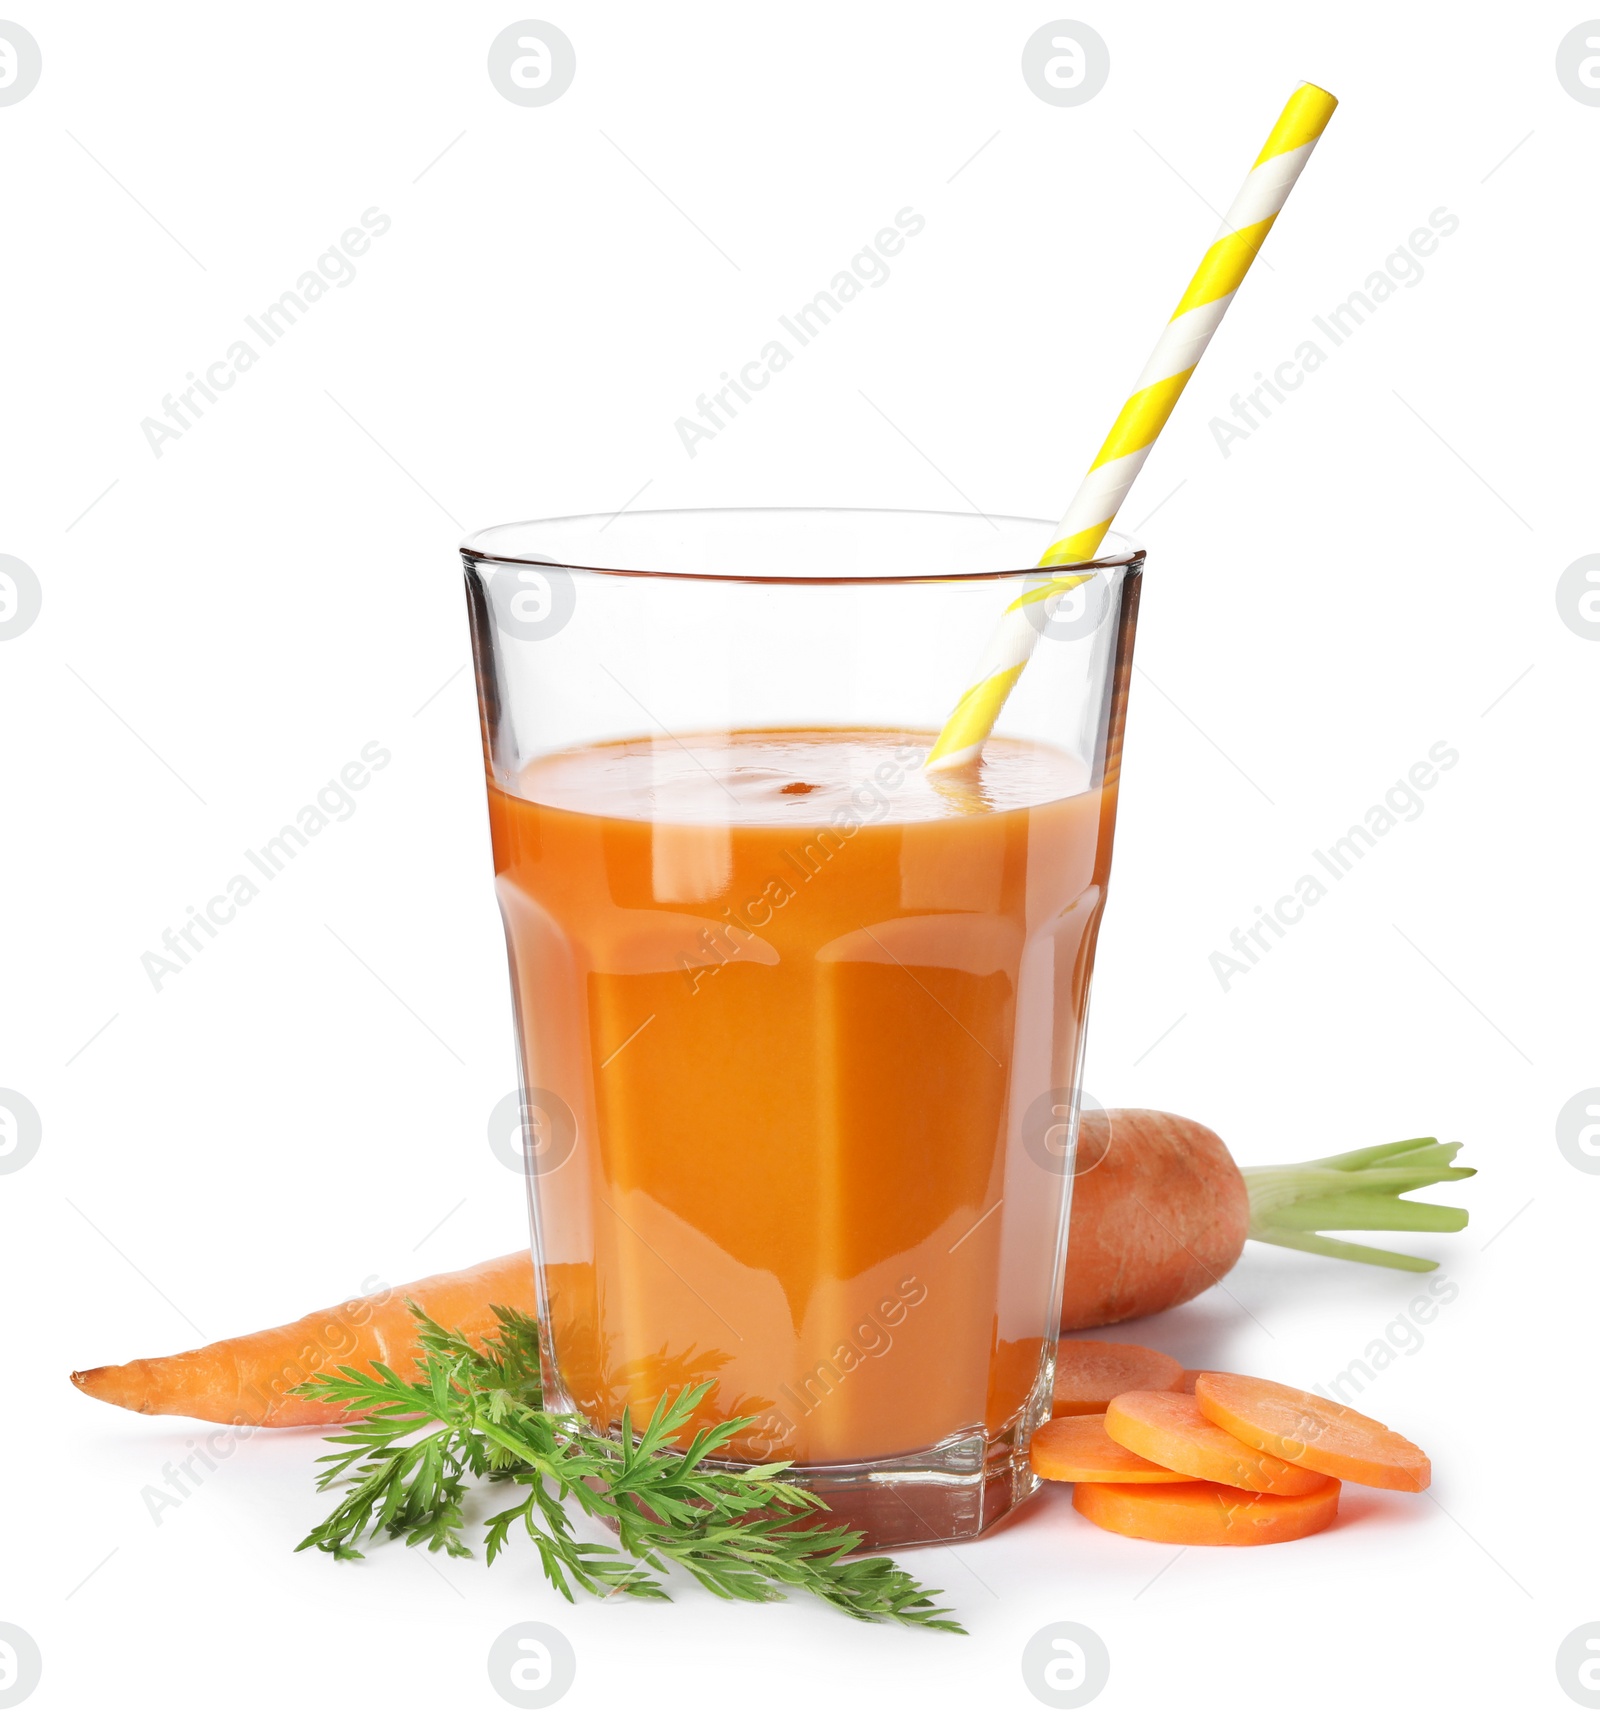 Photo of Carrot and glass of fresh juice on white background